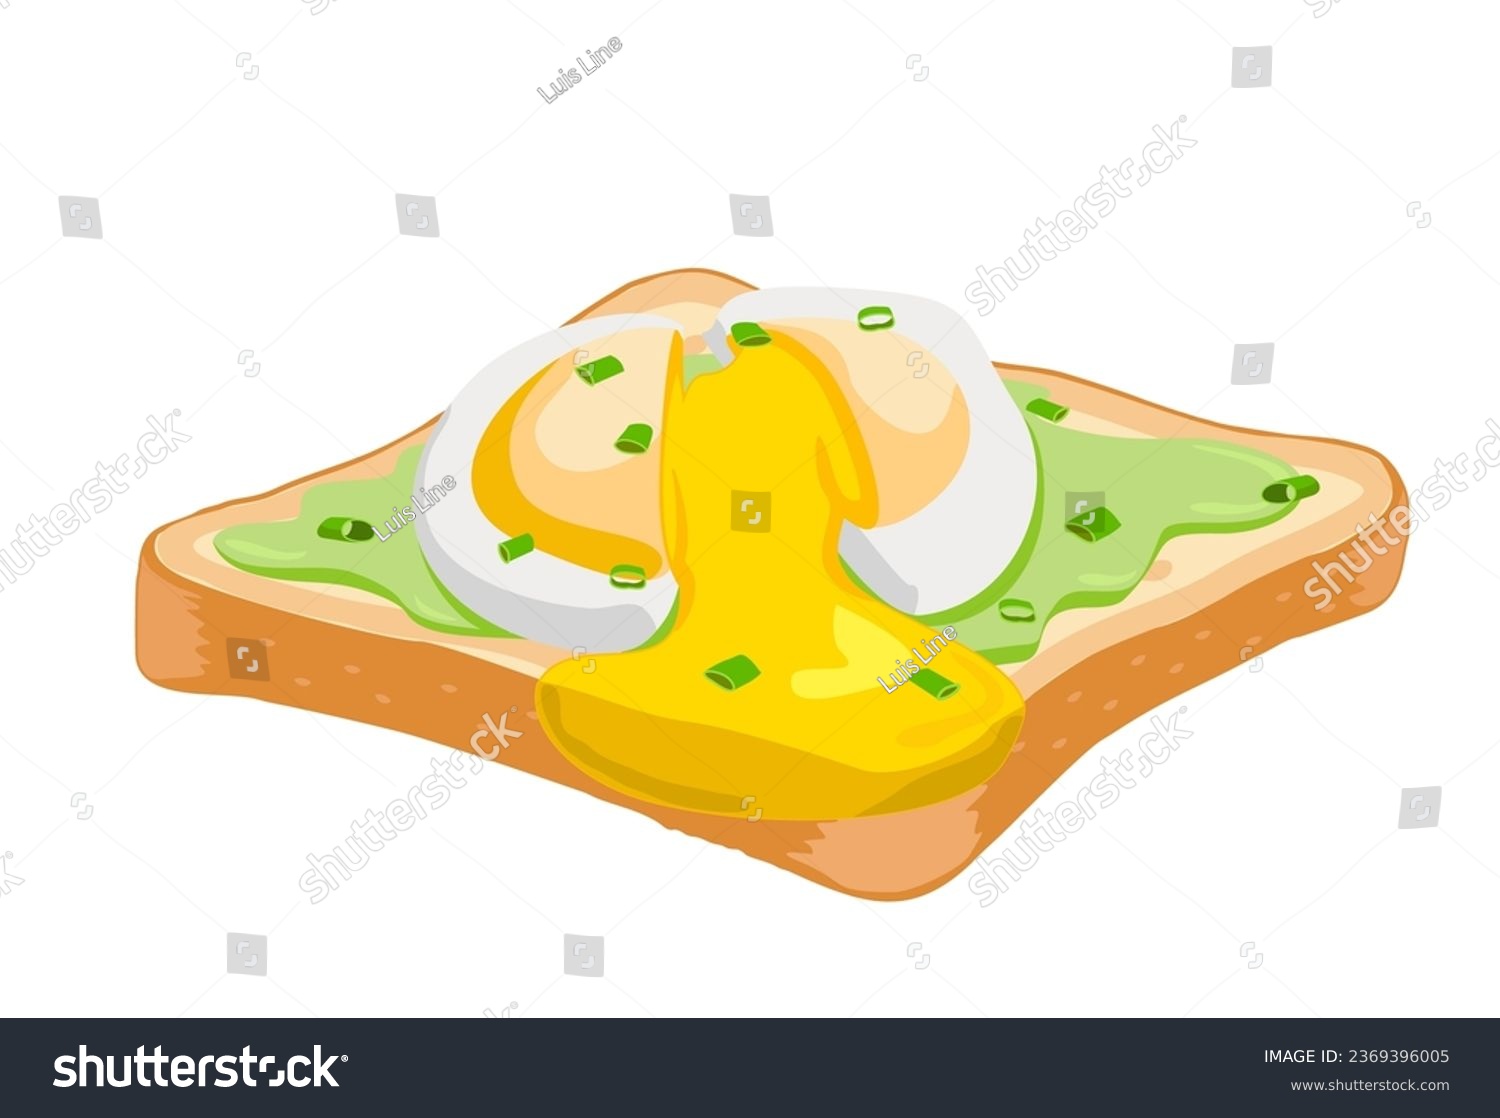 SVG of Poached egg on toast. Avocado toast. Fresh delicious egg poached. Healthy wholesome breakfast with toast and egg. Vector illustration isolated on white.  svg